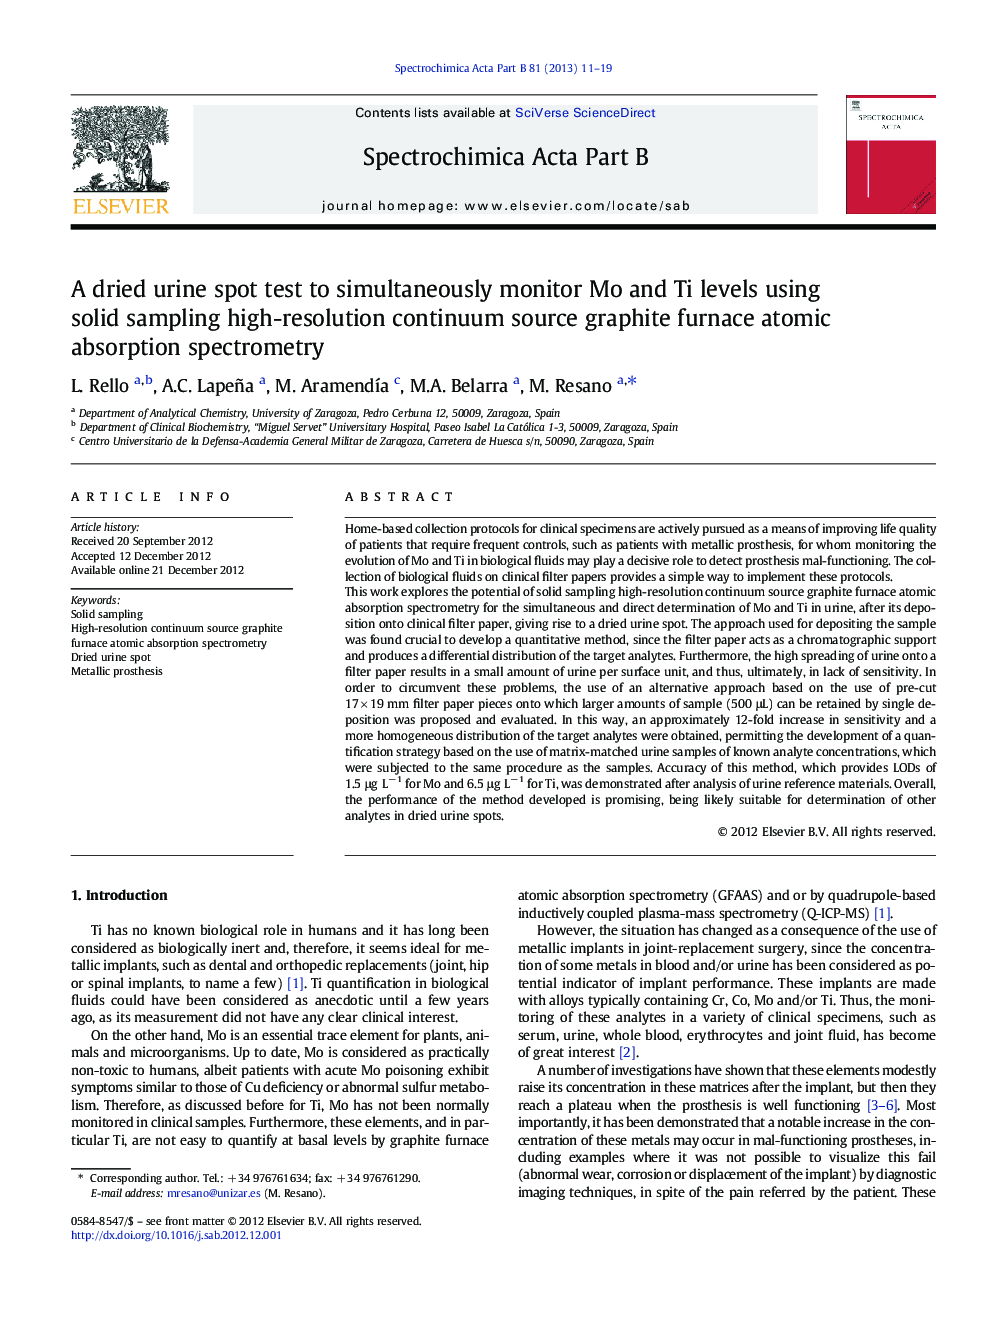 A dried urine spot test to simultaneously monitor Mo and Ti levels using solid sampling high-resolution continuum source graphite furnace atomic absorption spectrometry